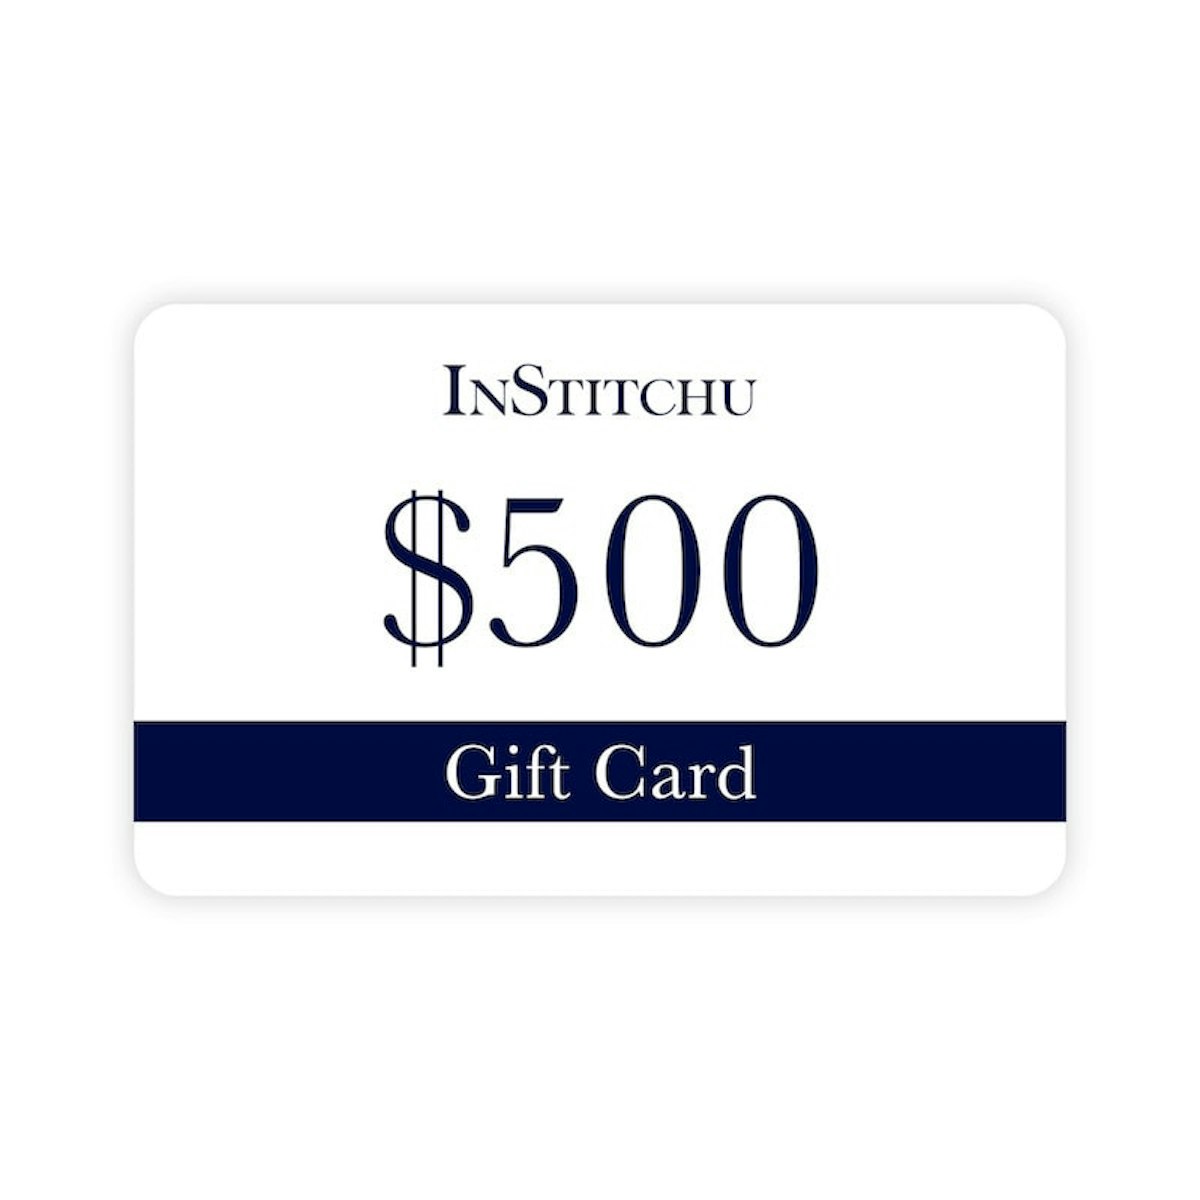 InStitchu Physical Gift Card $500